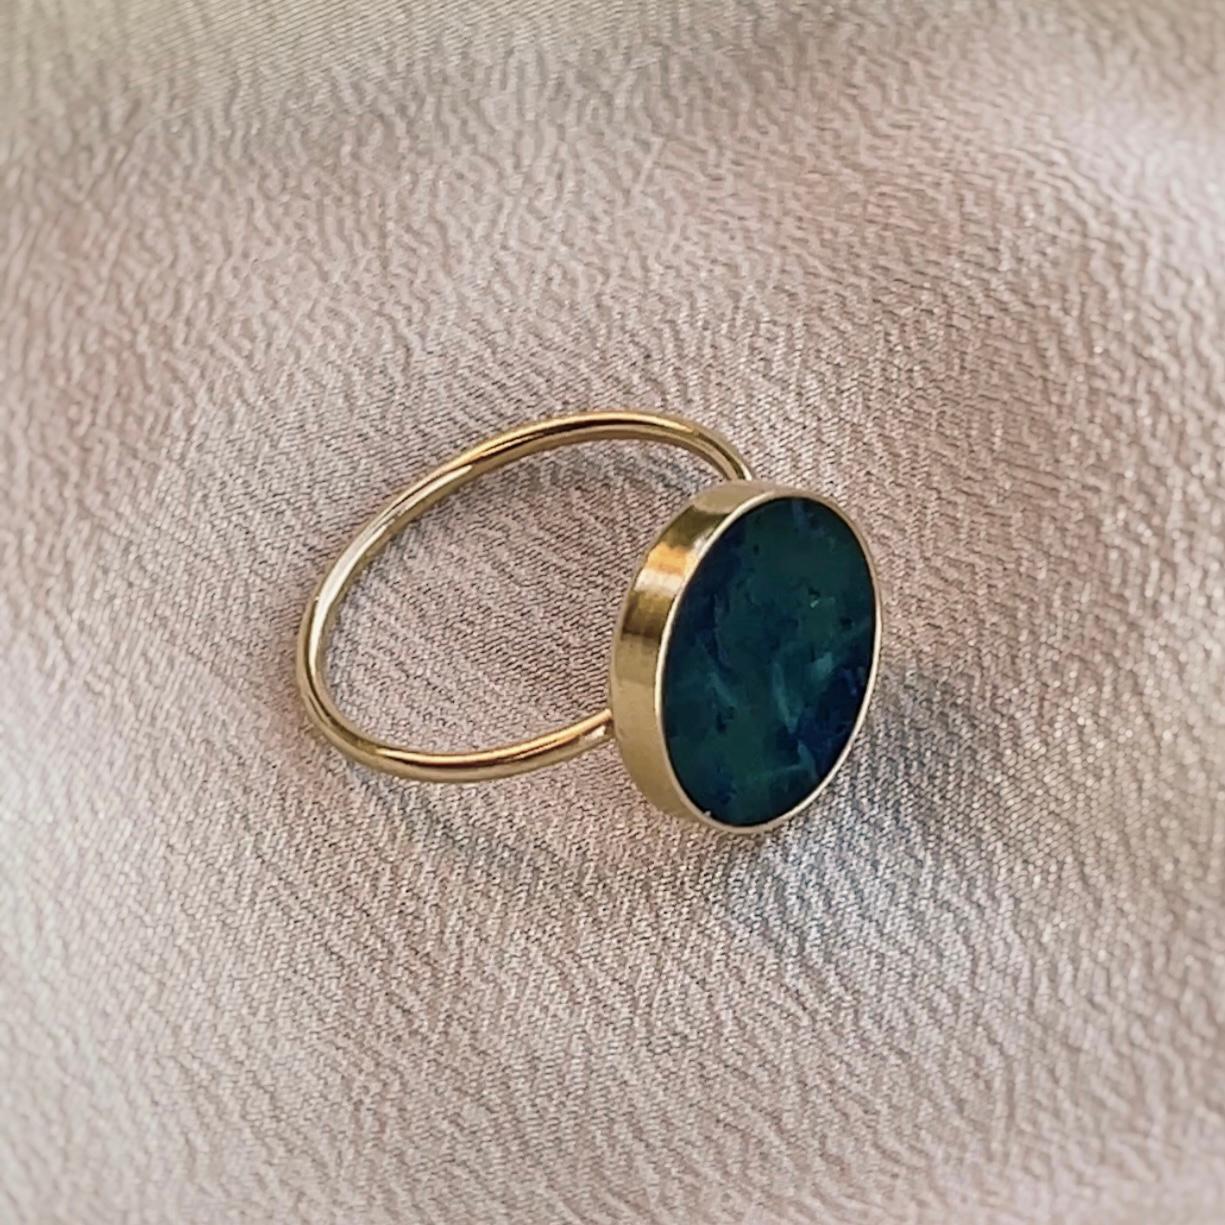 The Extravagance ring is one of the jewels that can not stay unnoticed. You will love the simplicity of its form, beautifully combined with the captivating green colour of the natural stone.

Nephrite jade which adornes the ring promotes good